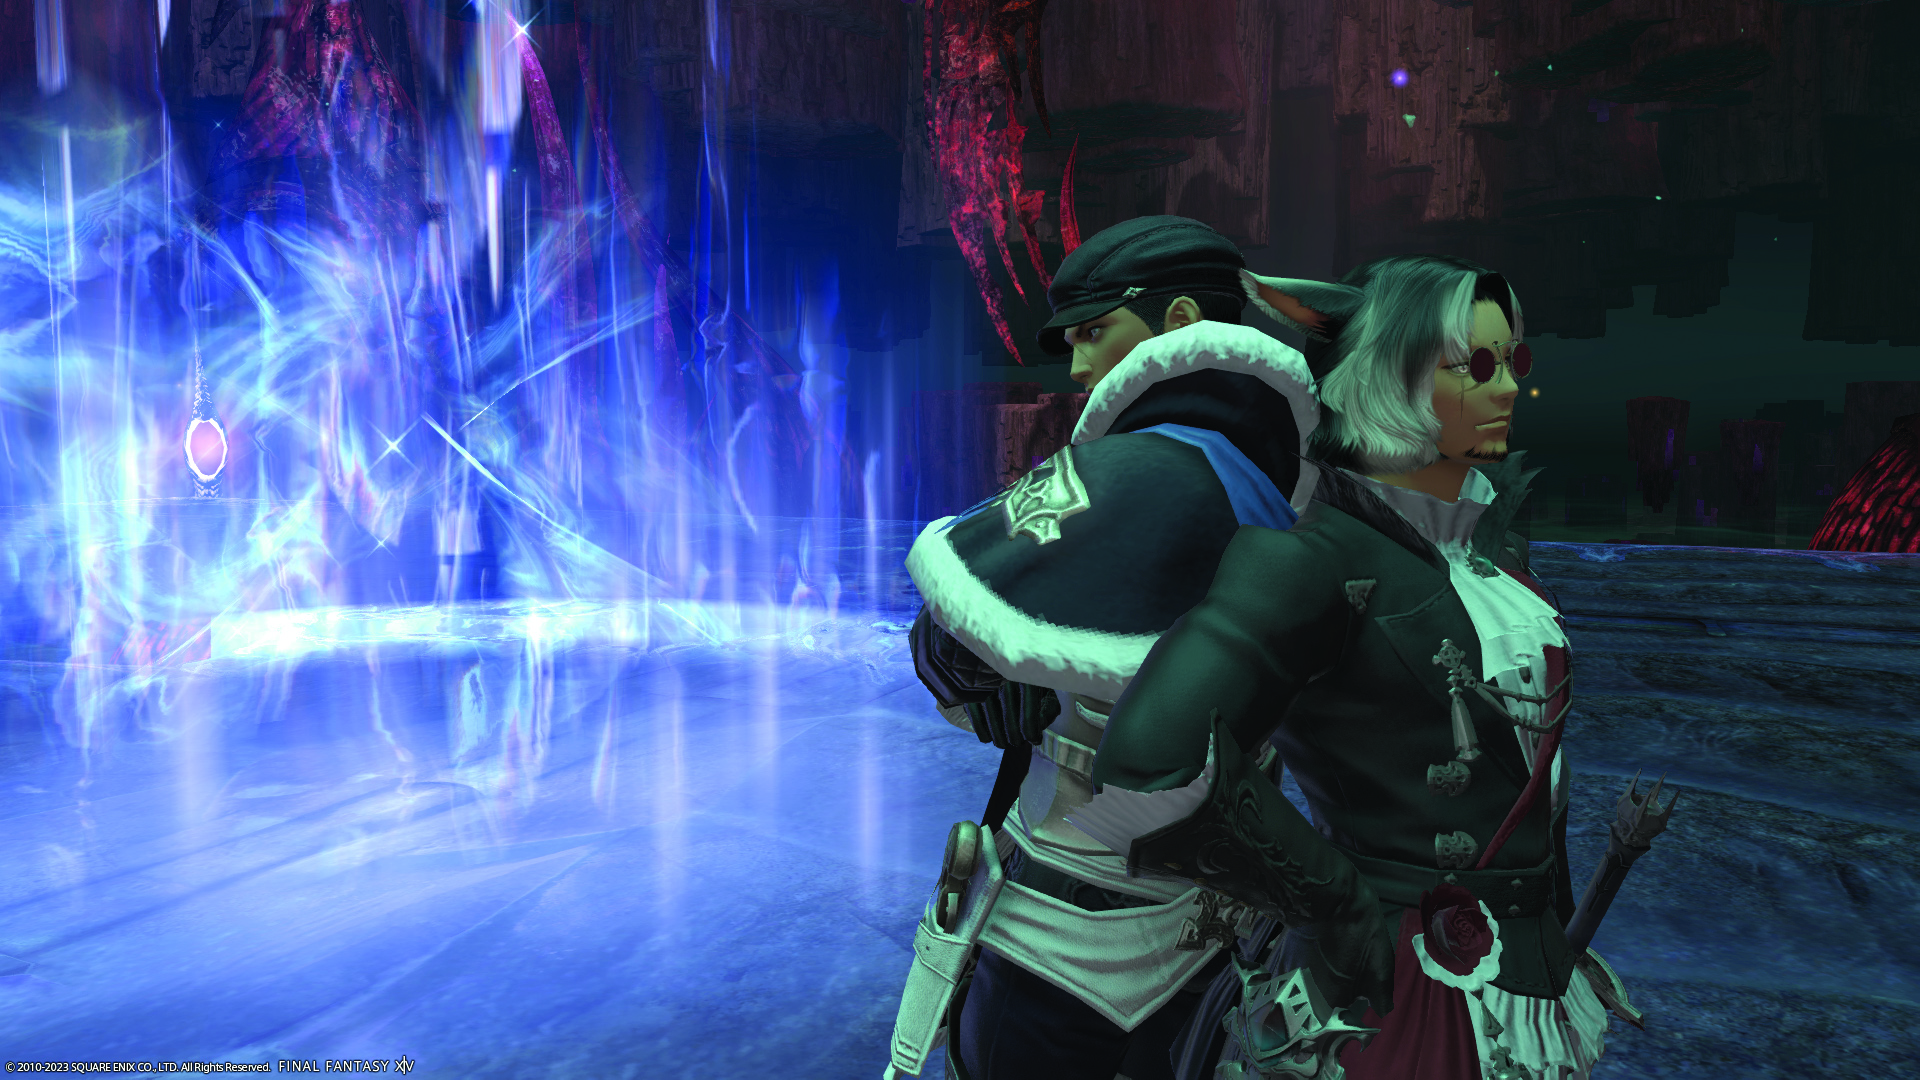 Two fancy looking FF14 characters standing back to back next to a magical blue aura.